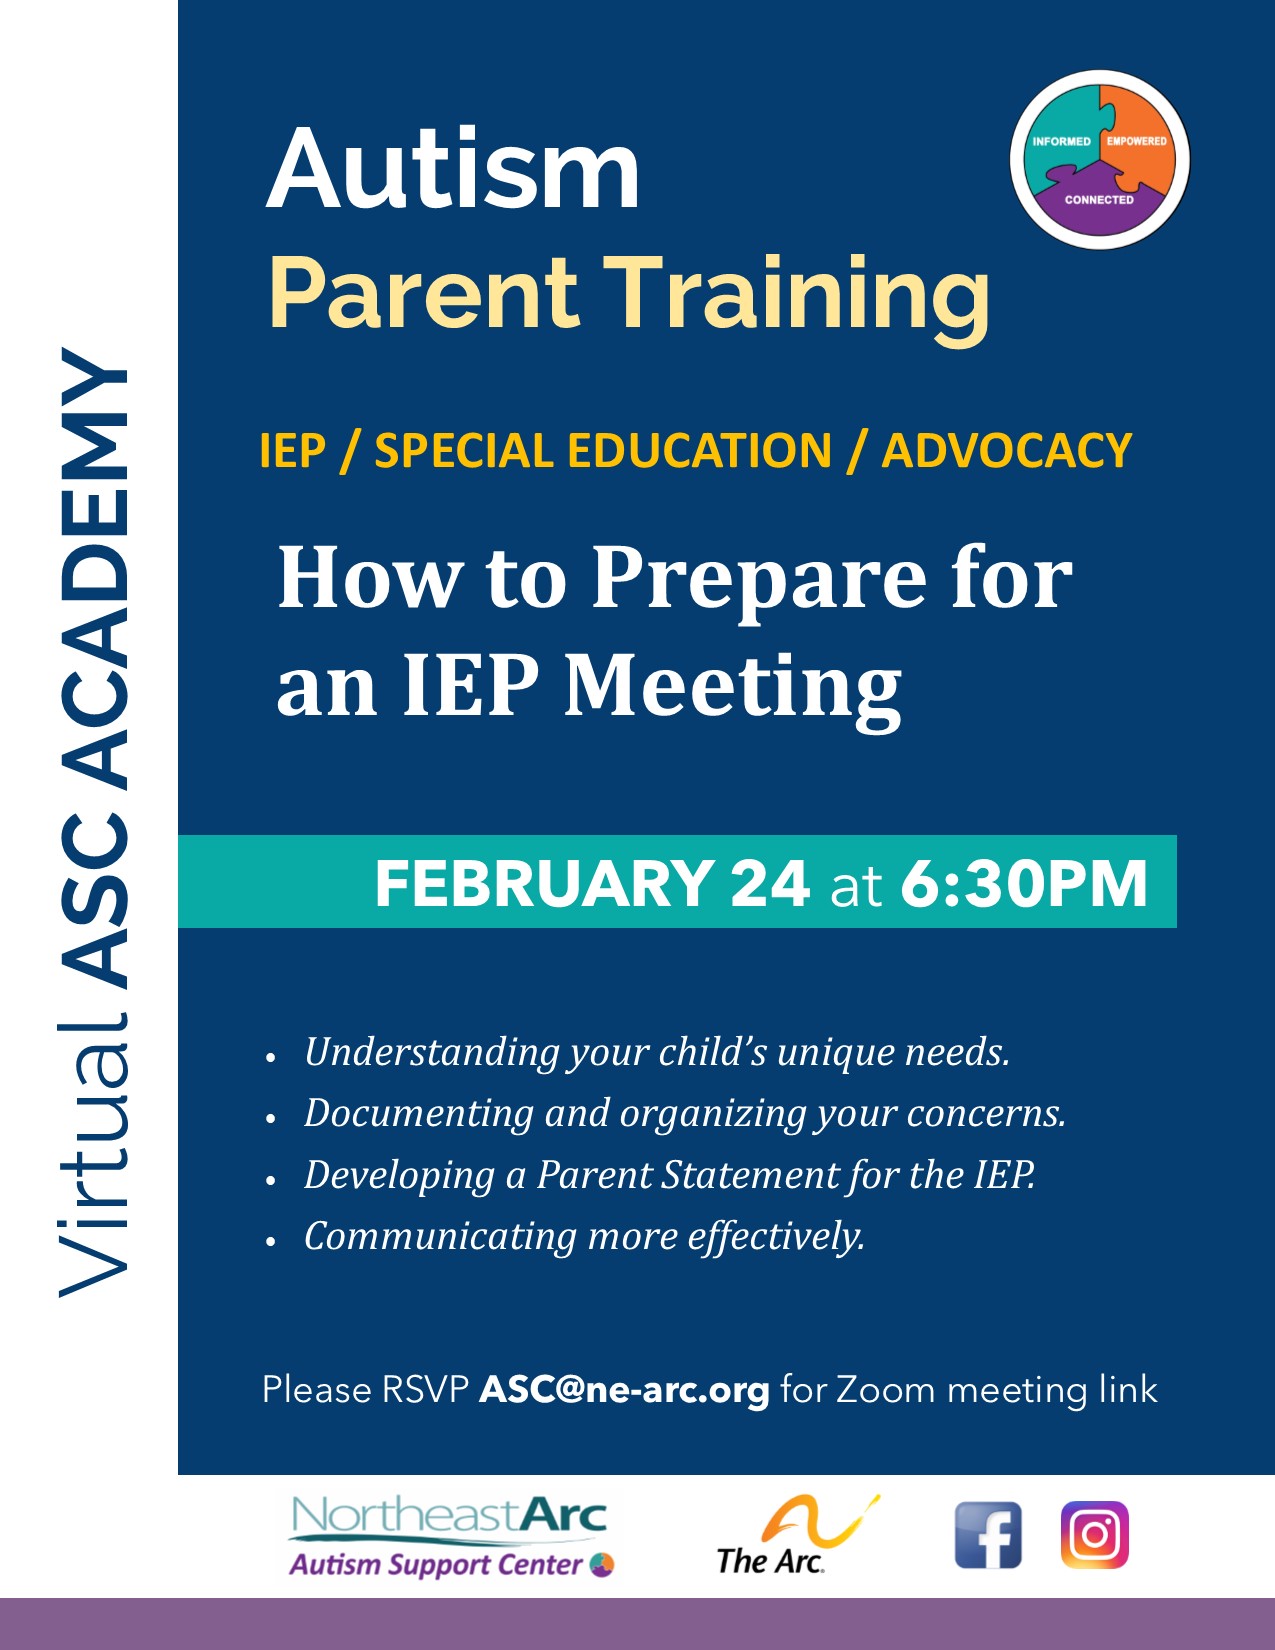 Flyer for Autism Support Center Parent Training on How to Prepare for an IEP Meeting, on February 24 at 6:30PM. Please RSVP the Autism Support Center at ASC@ne-arc.org for Zoom meeting link.